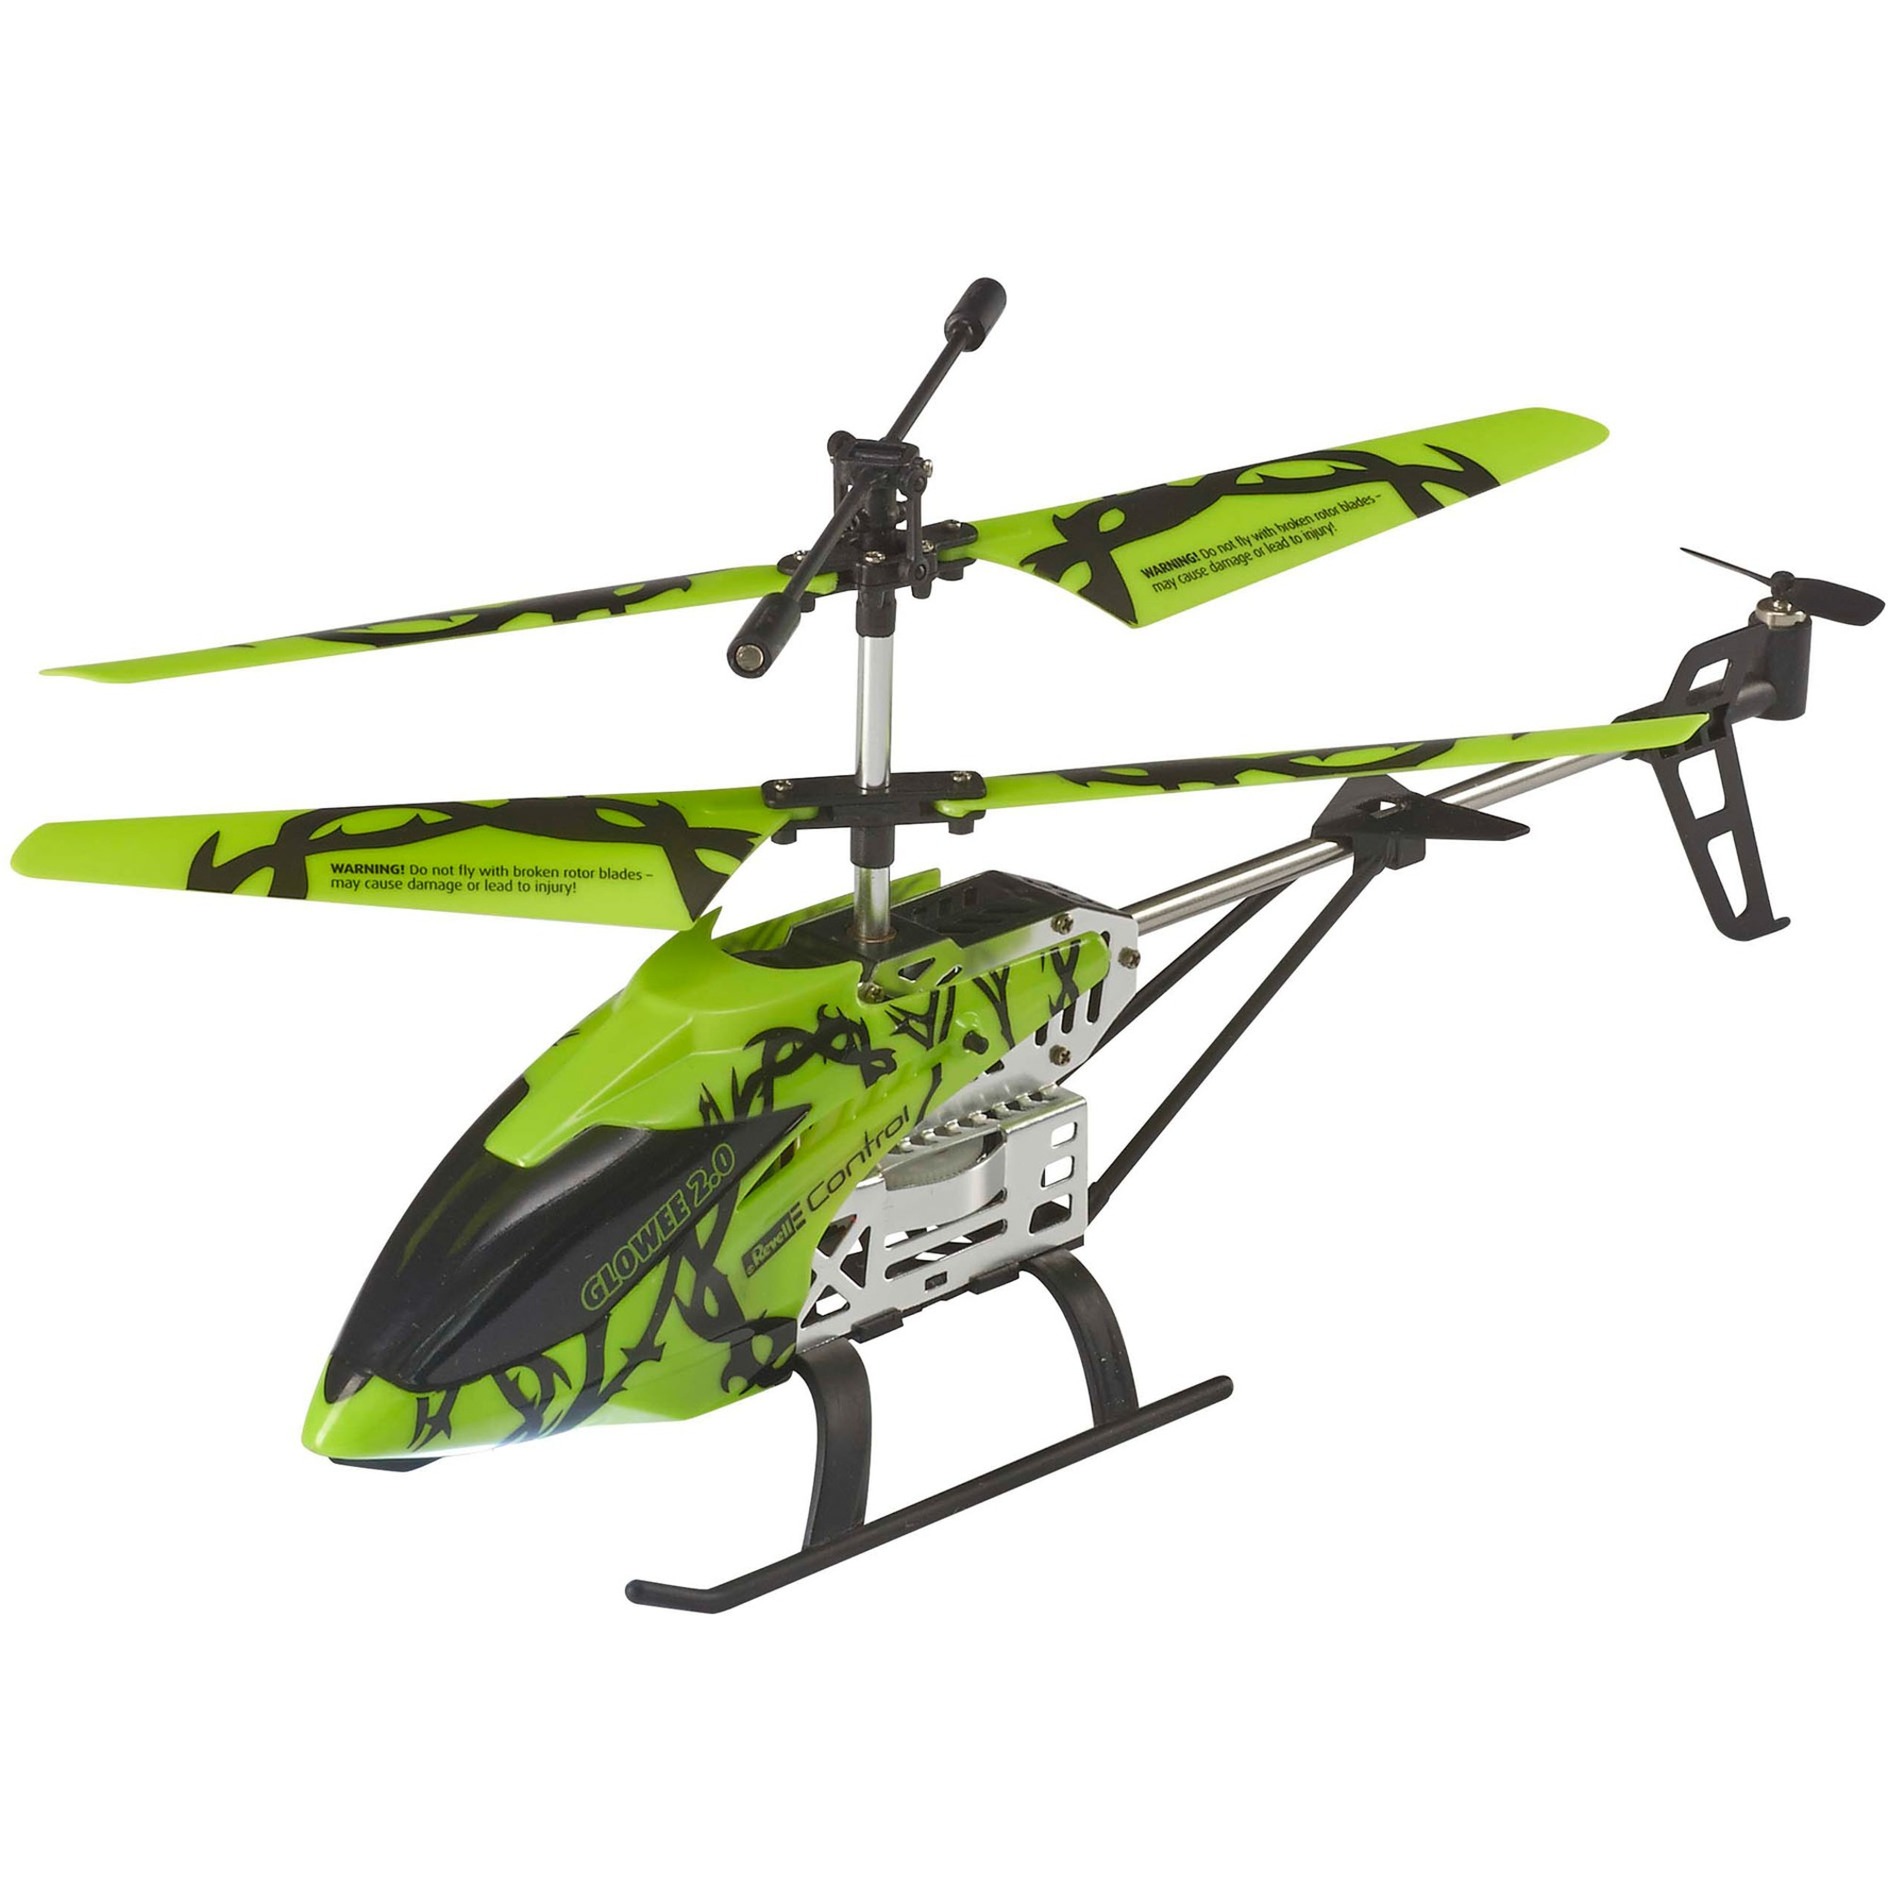 Helicopter GLOWEE 2.0, RC